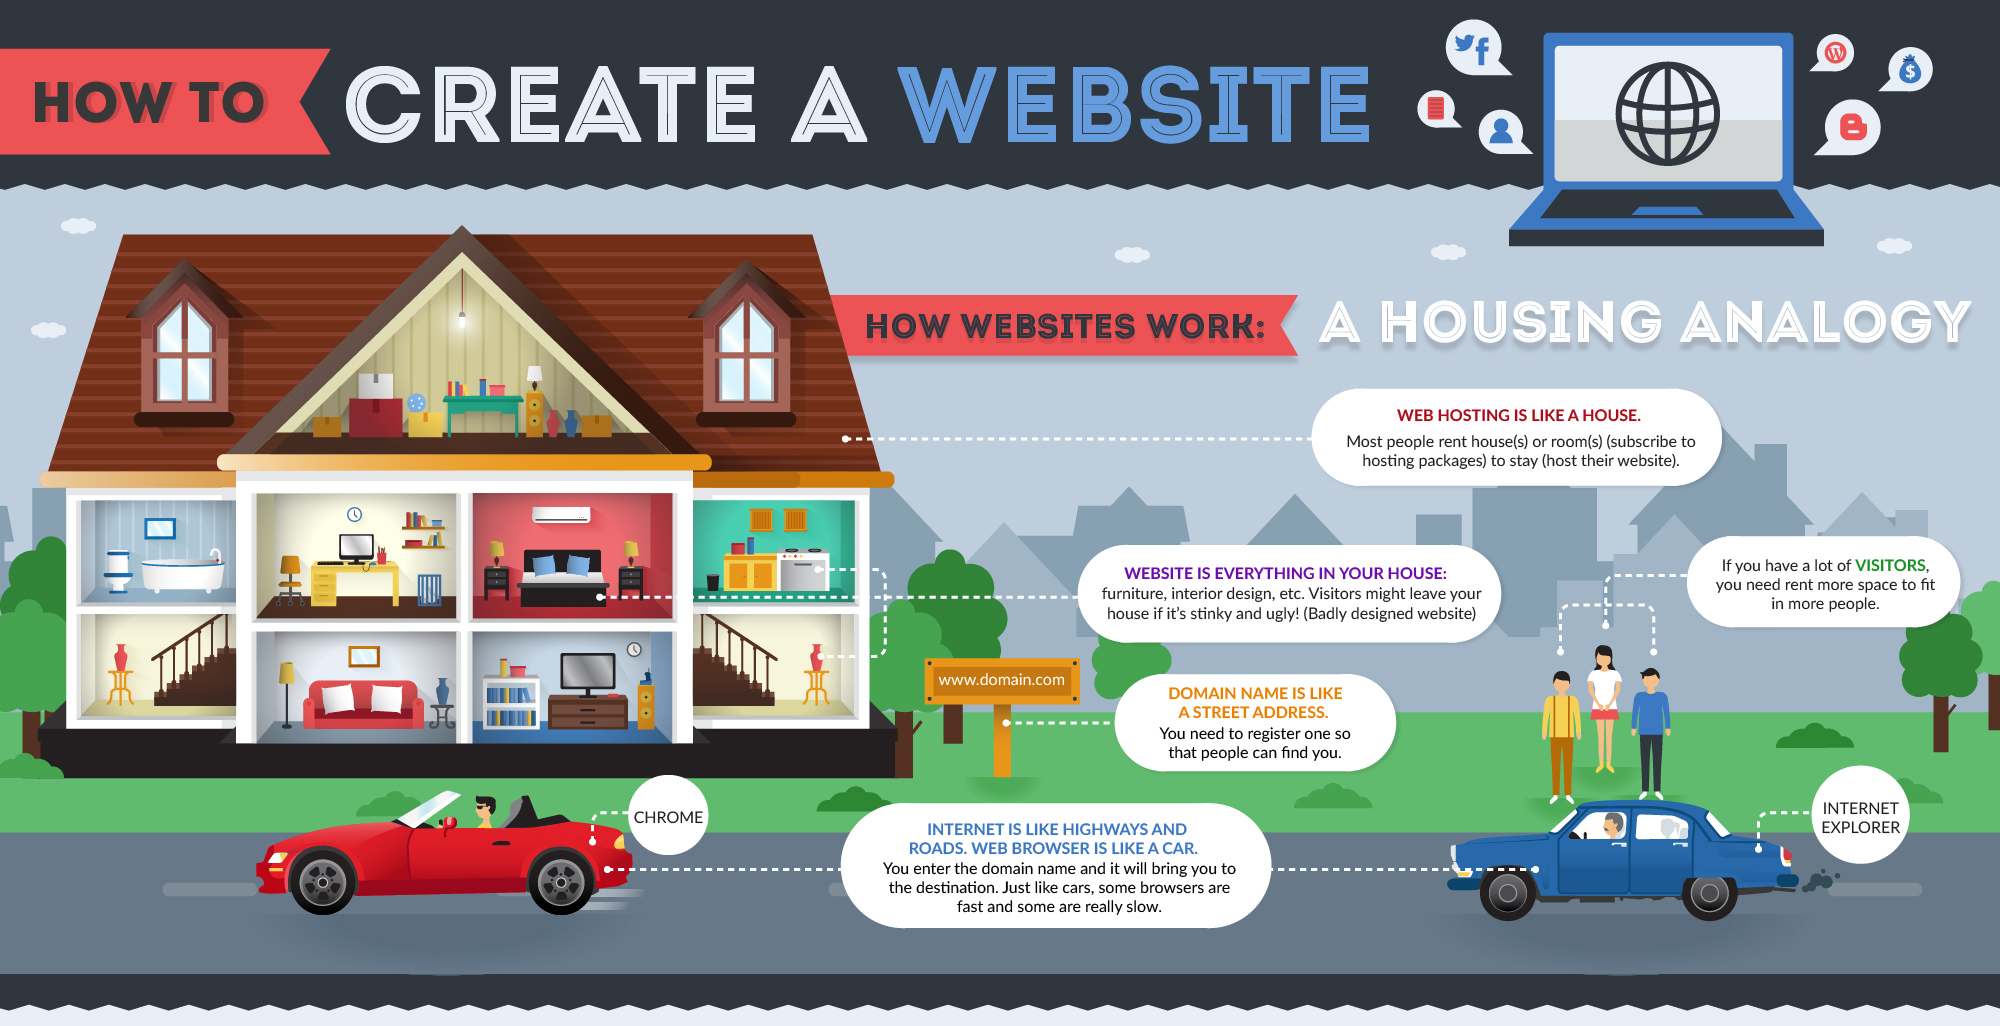 A beginner's guide to creating a website (Infographic)